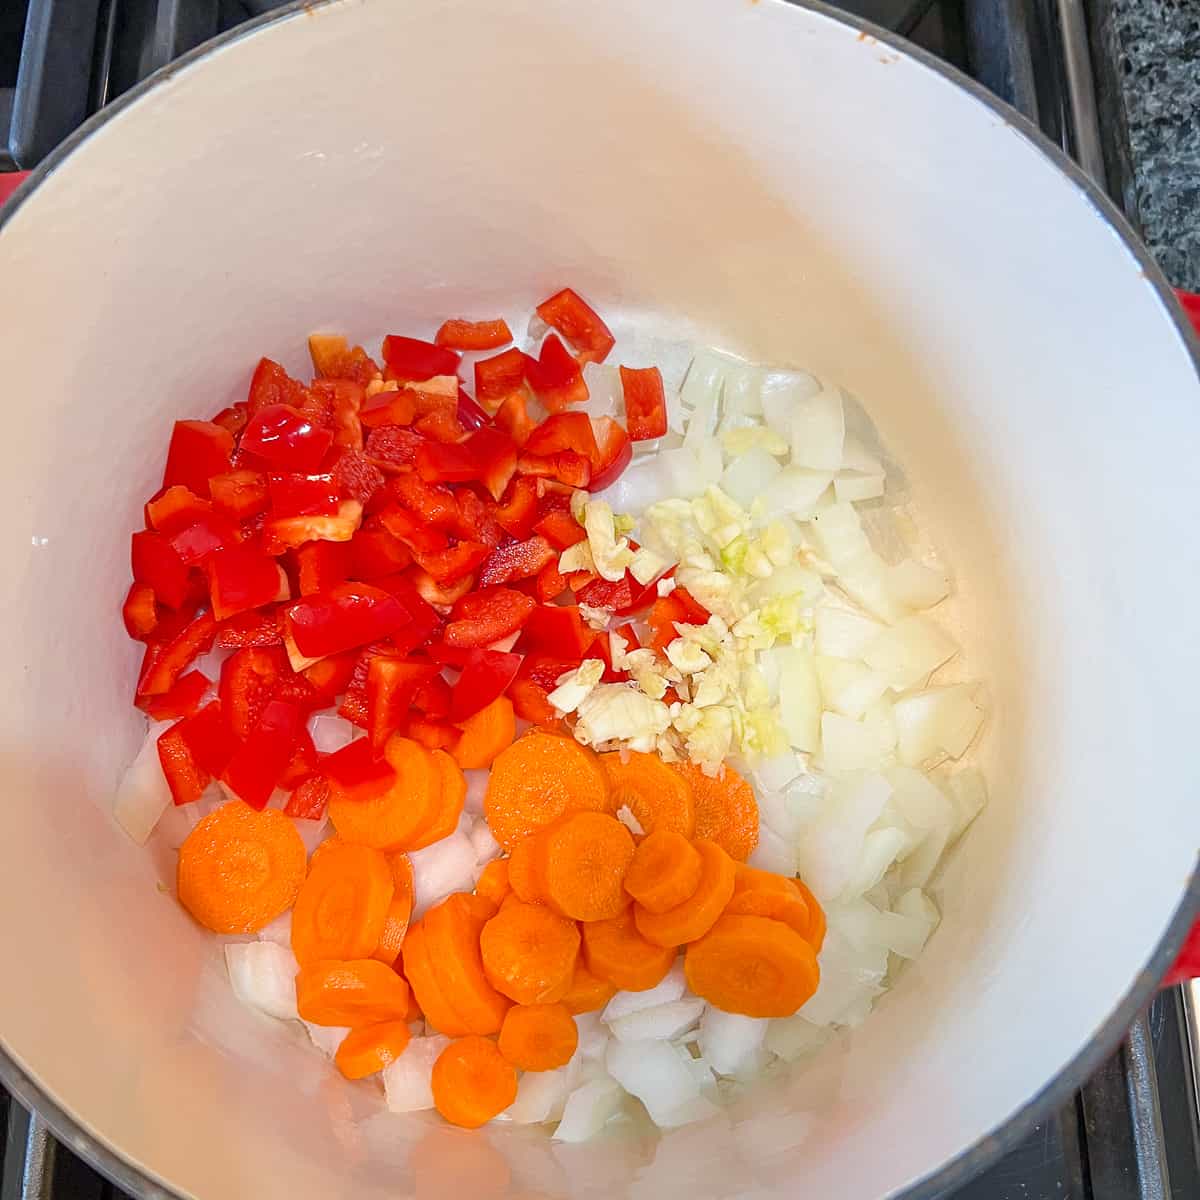 A pot with chopped vegetables on the stovetop.